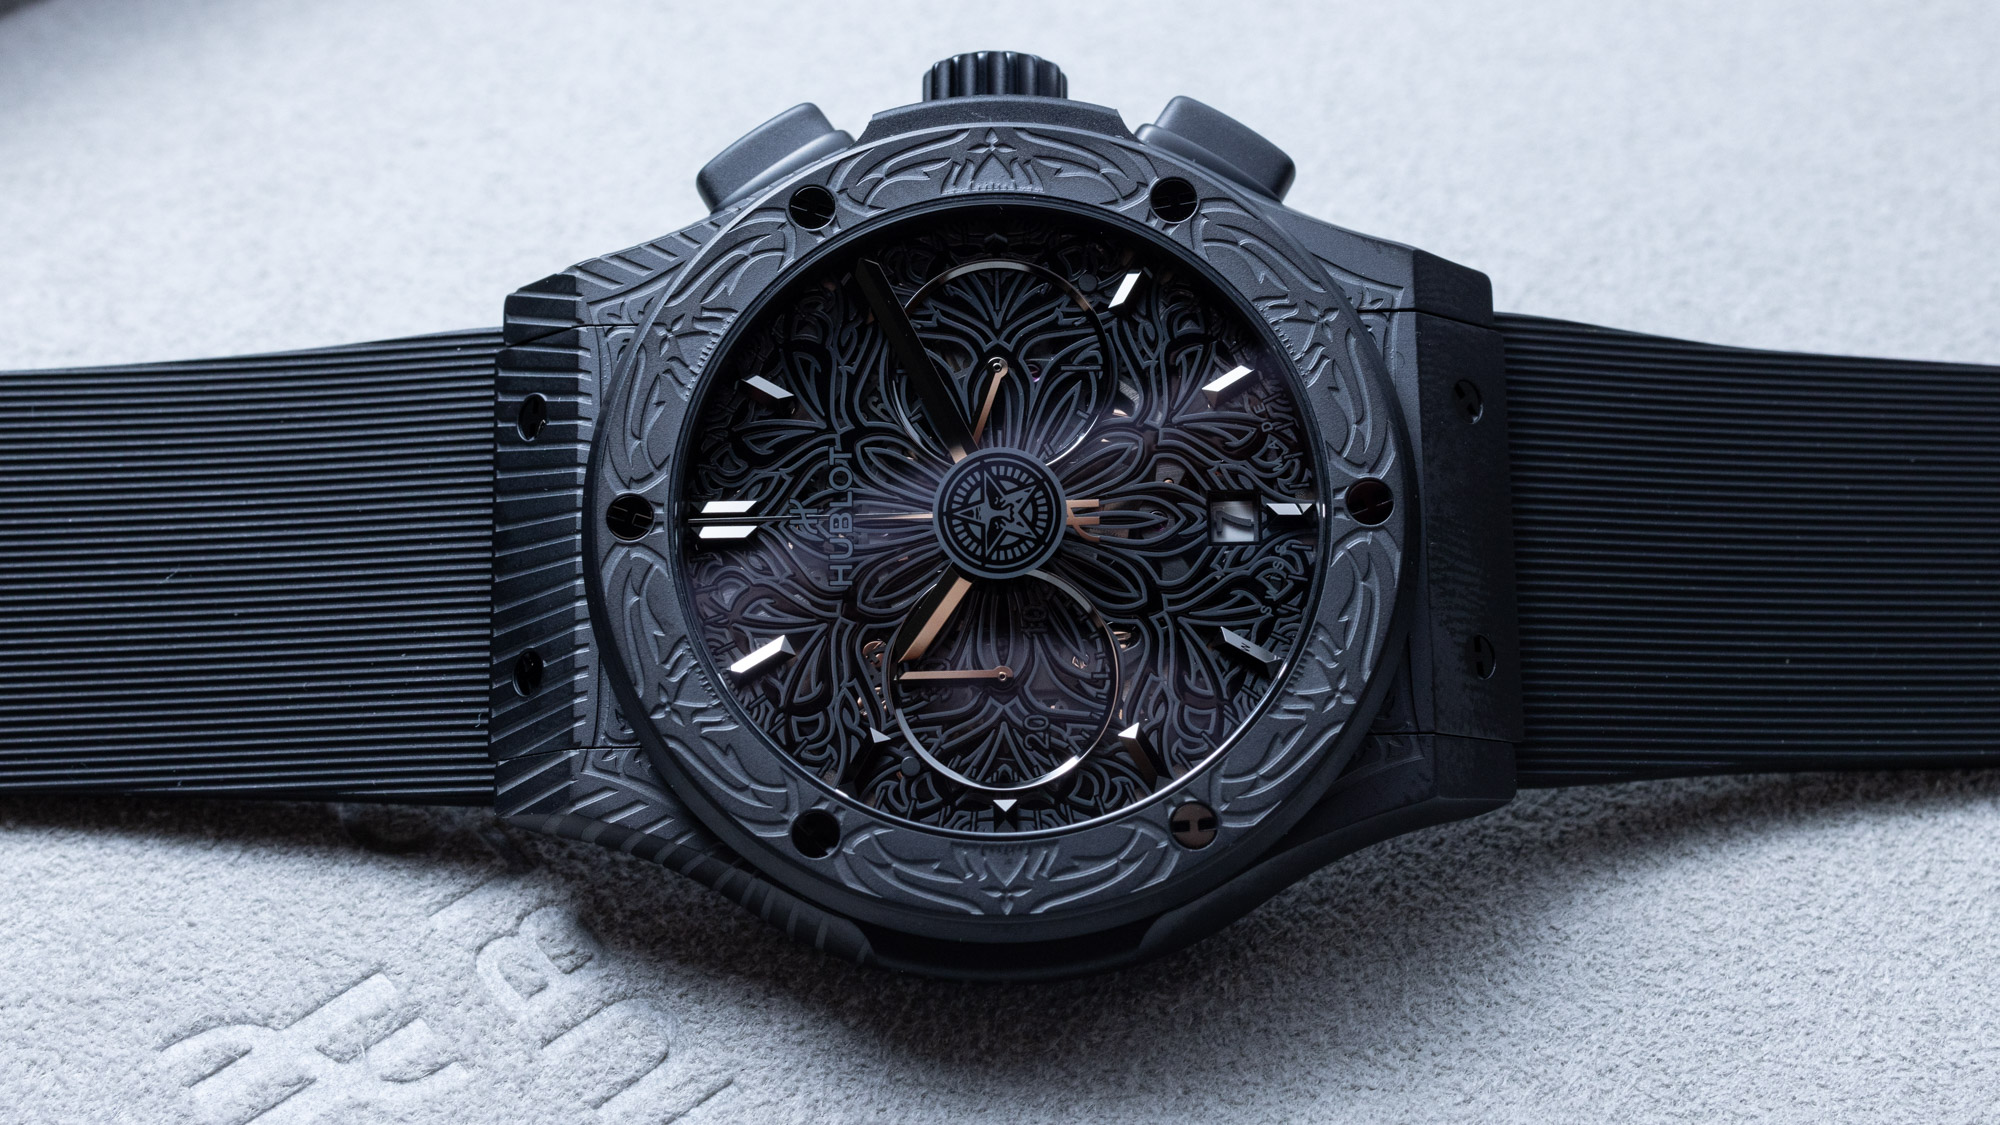 Hands-On: Limited-Edition Hublot Classic Fusion Aerofusion